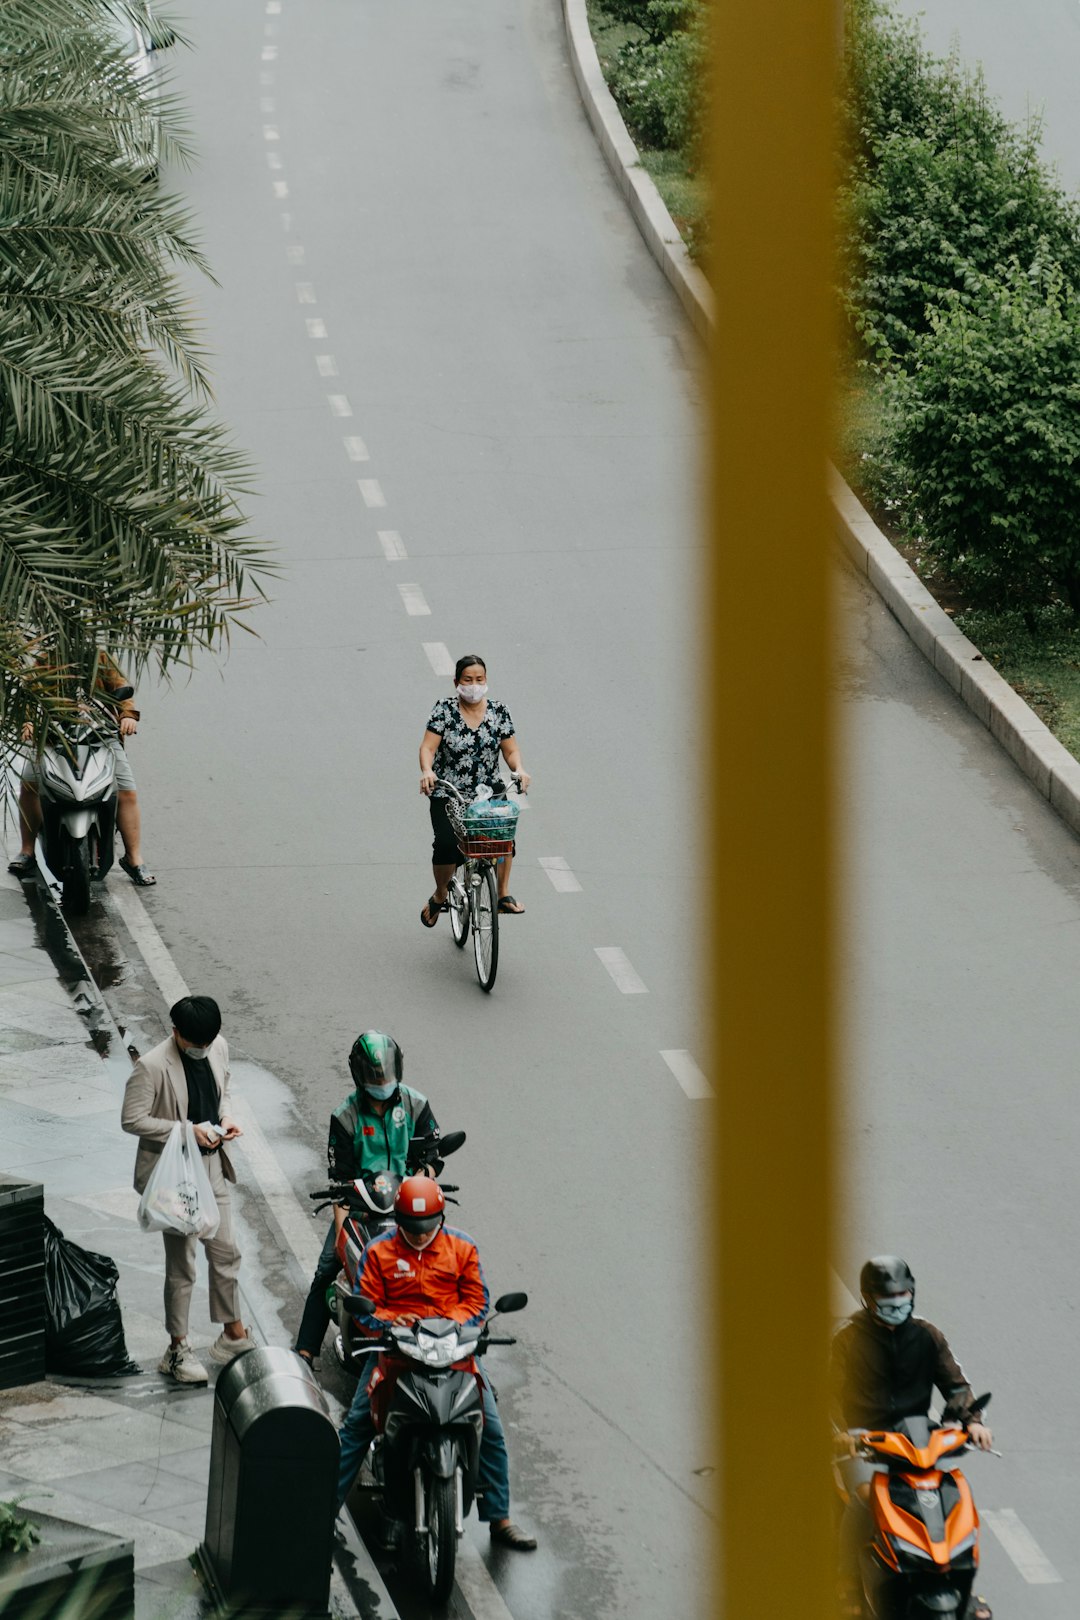 people riding bicycles on road during daytime